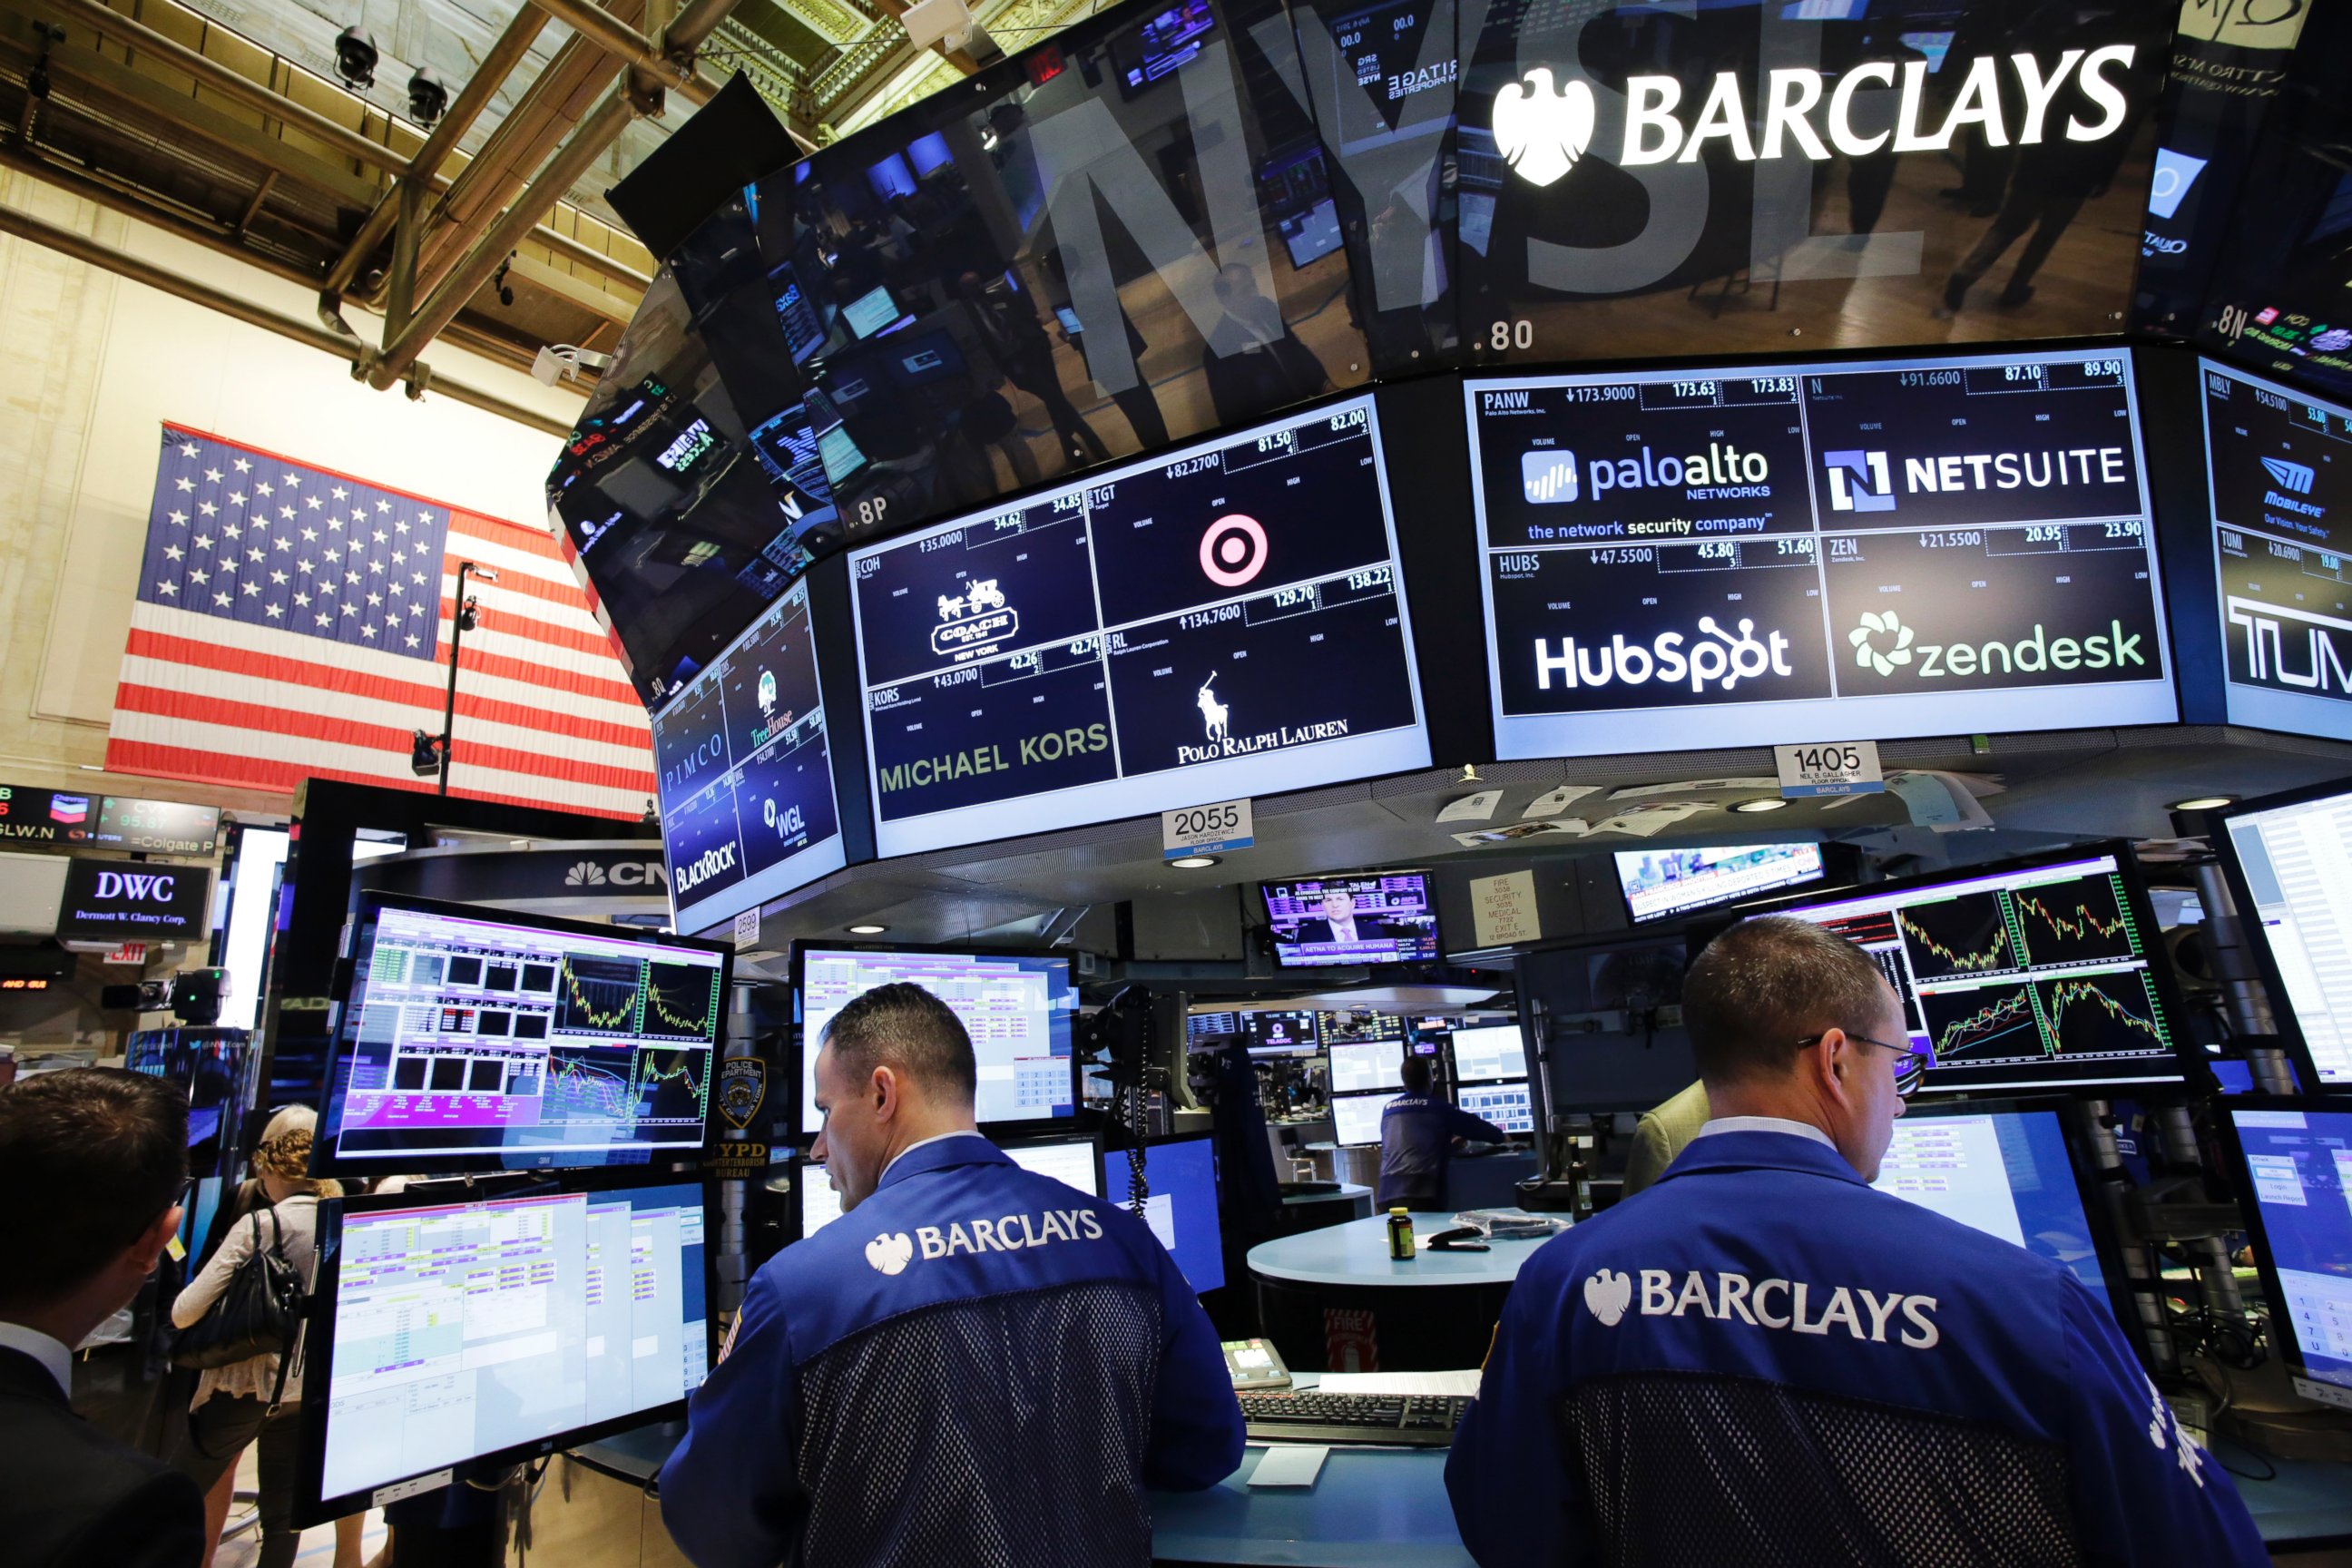 PHOTO: Traders with Barclays work at the New York Stock Exchange, July 6, 2015. World markets are trending downward following Greece's "no" vote in Sunday's debt referendum.